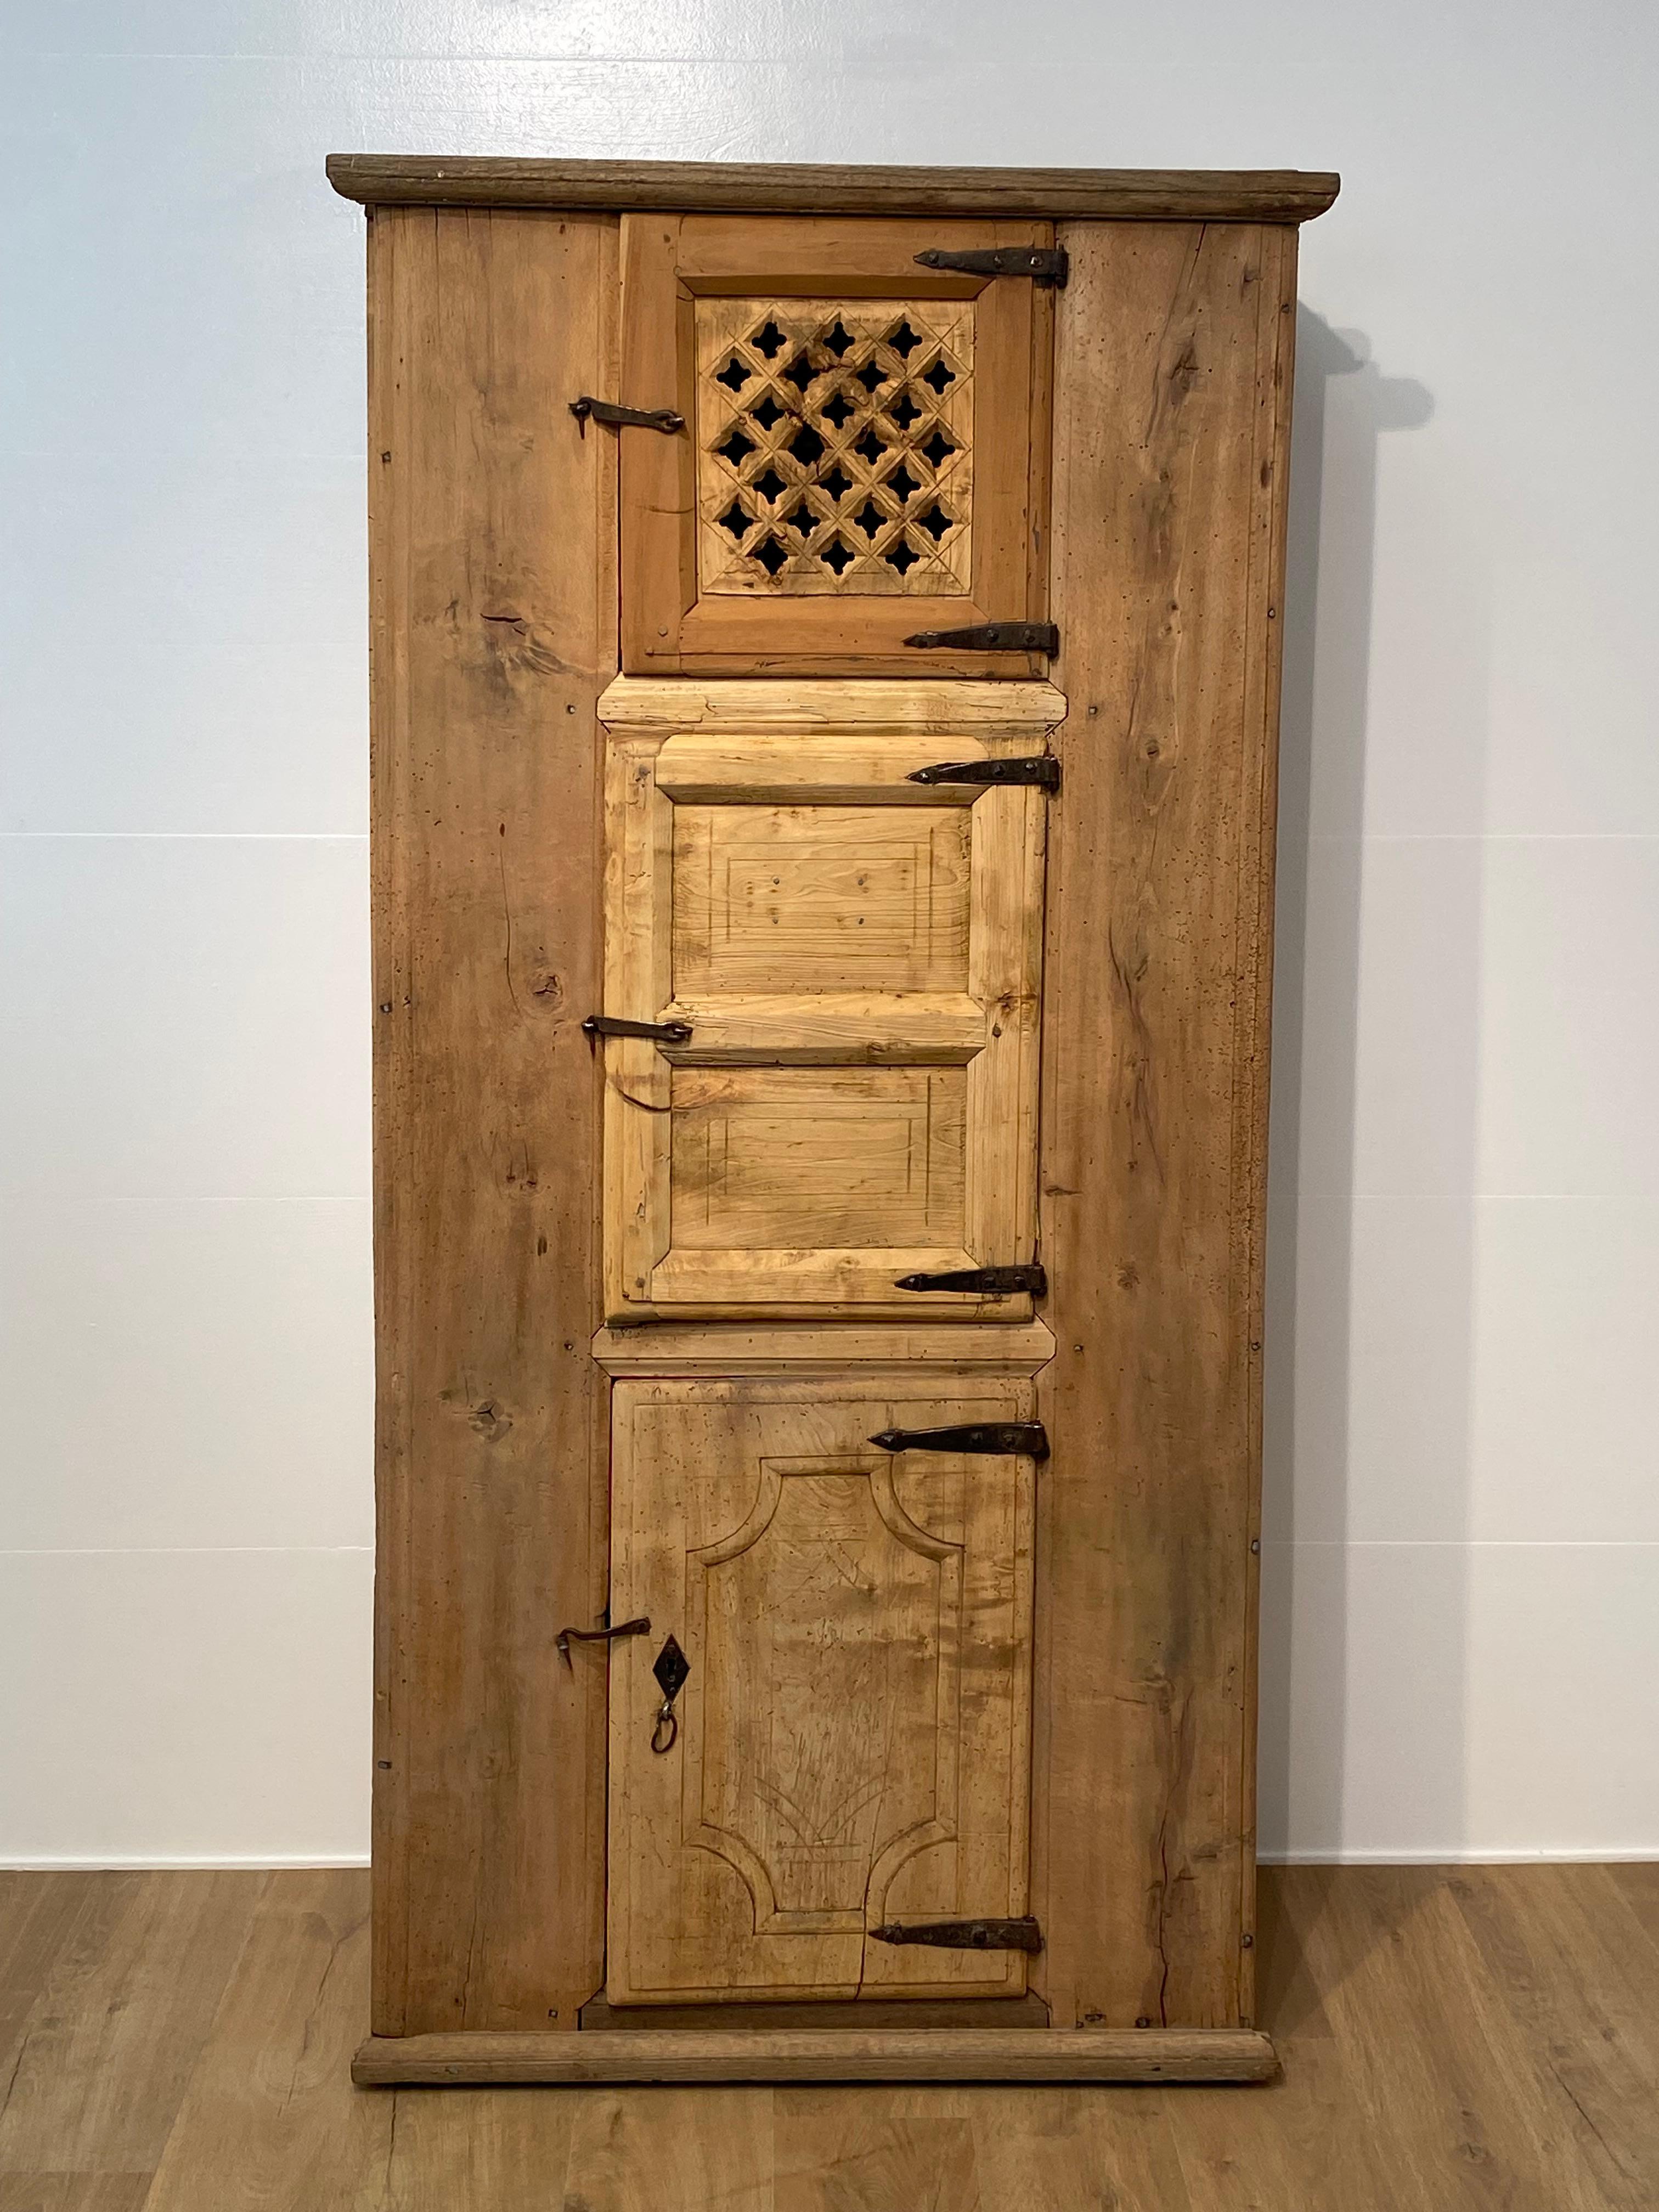 Exceptional, Brutalist Farmers Cupboard from the Catalan Region in the North Of Spain,from the 19 th Century,an Arte Povere artwork,
the cupboard is made of bleached Chestnut and other Fruitwoods,
and was used to store food and wine and bread, that